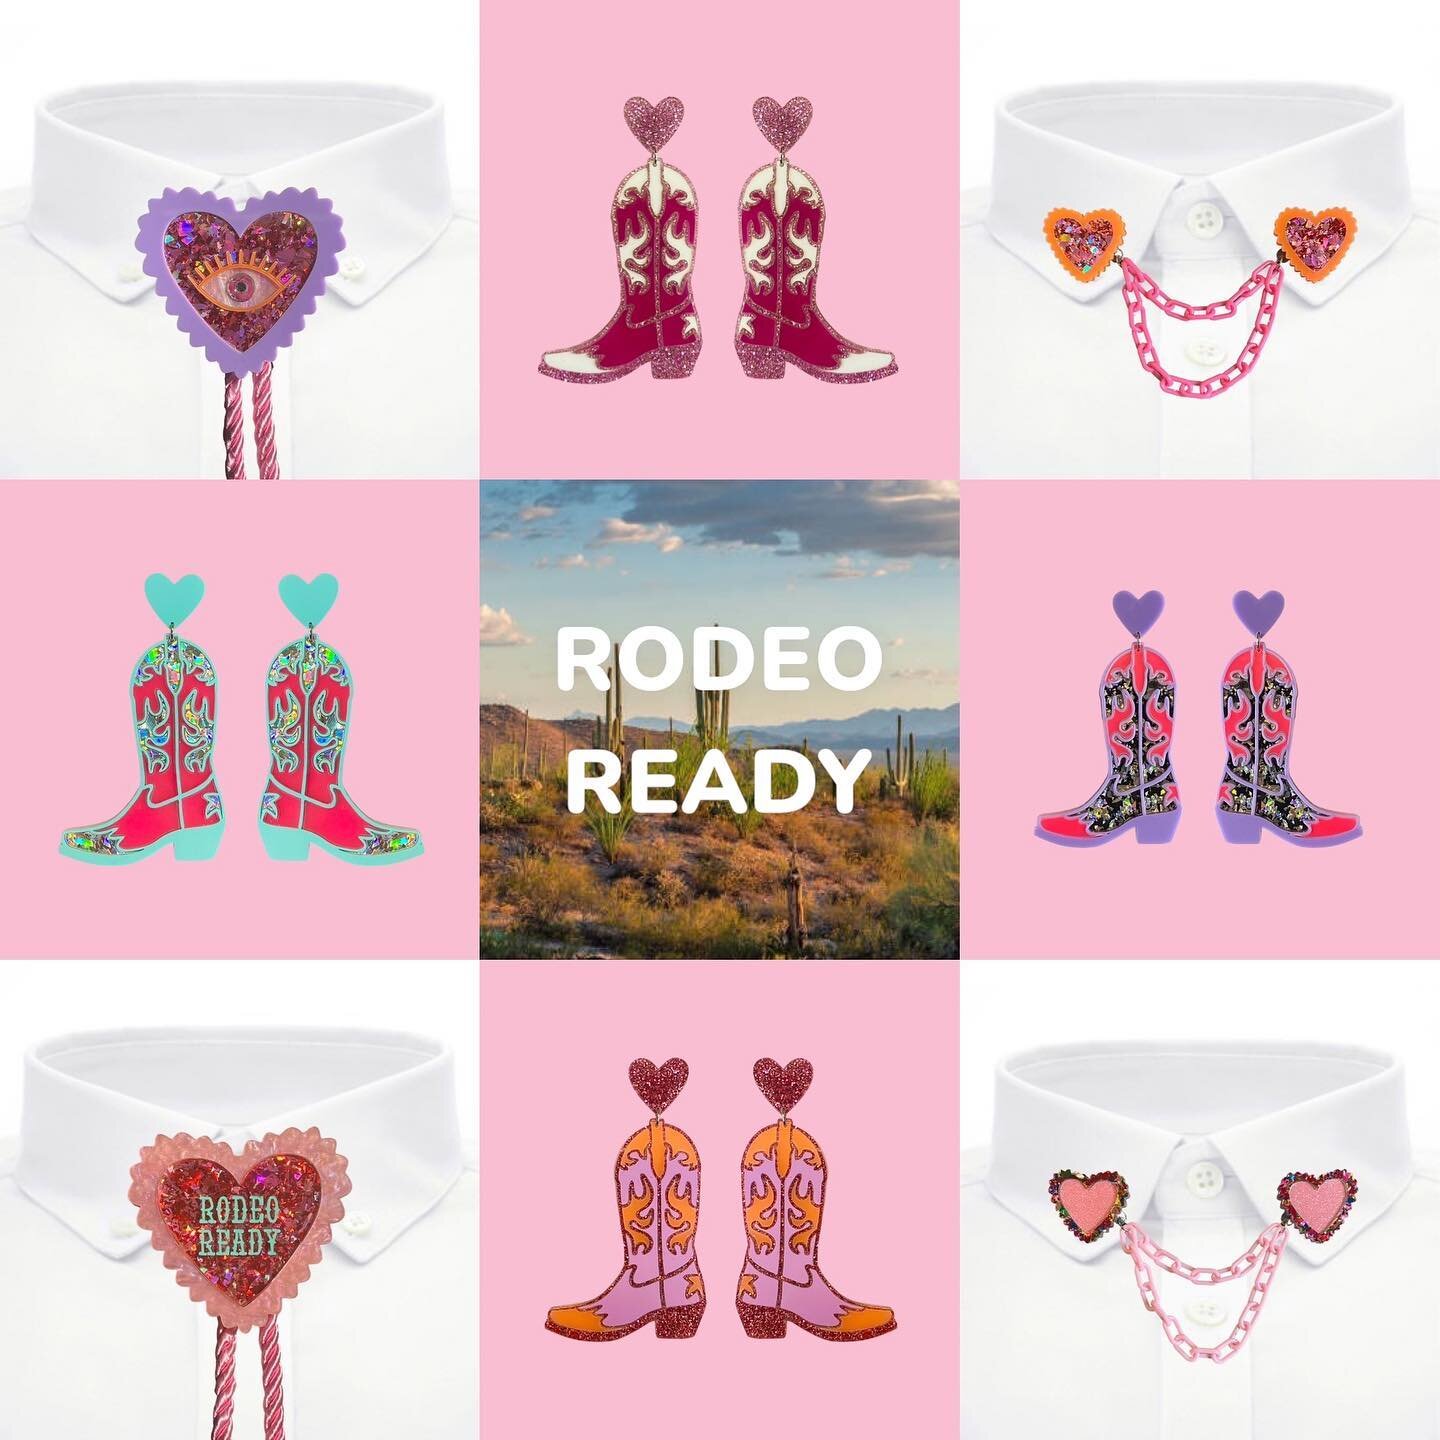 Let&rsquo;s get RODEO READY 🤠💖🌵

You can now shop from our RODEO READY collection, there are very limited numbers available and many off designs so don&rsquo;t hang around, you don&rsquo;t wanna have rodeo regret&hellip; 

nobasicbombshell.com/rod